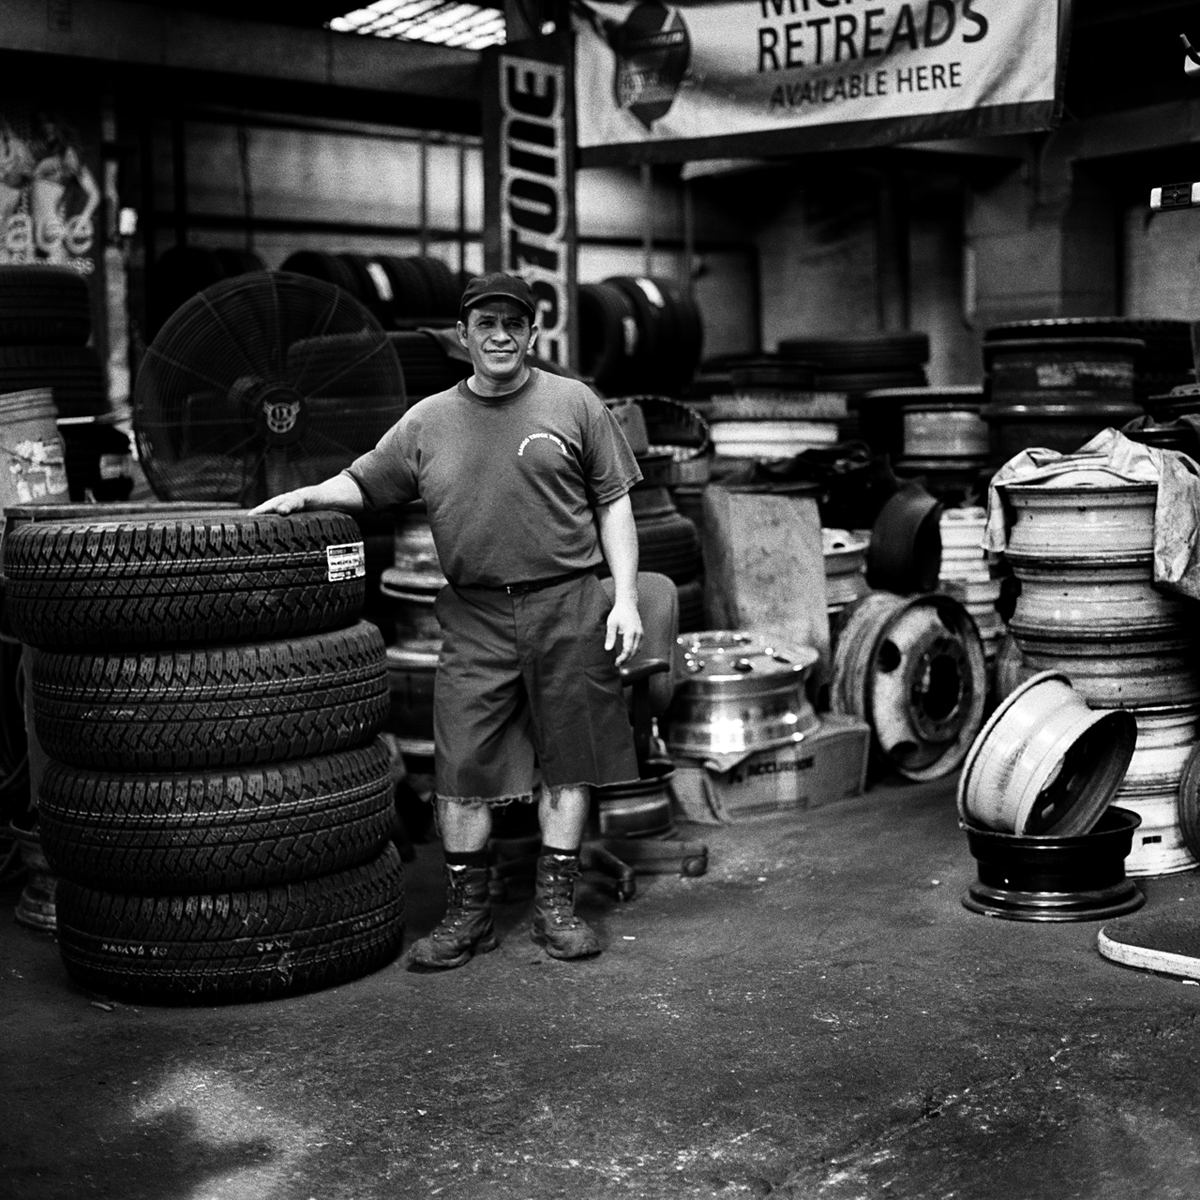  Samco Truck Tire employee, Hector, stands before the valley of tires used to service the hundreds of trucks that criss-cross the industrial zone that resonates from the banks of Newtown Creek.  Bushwick, Brooklyn, N.Y. (Oct. 2015) 